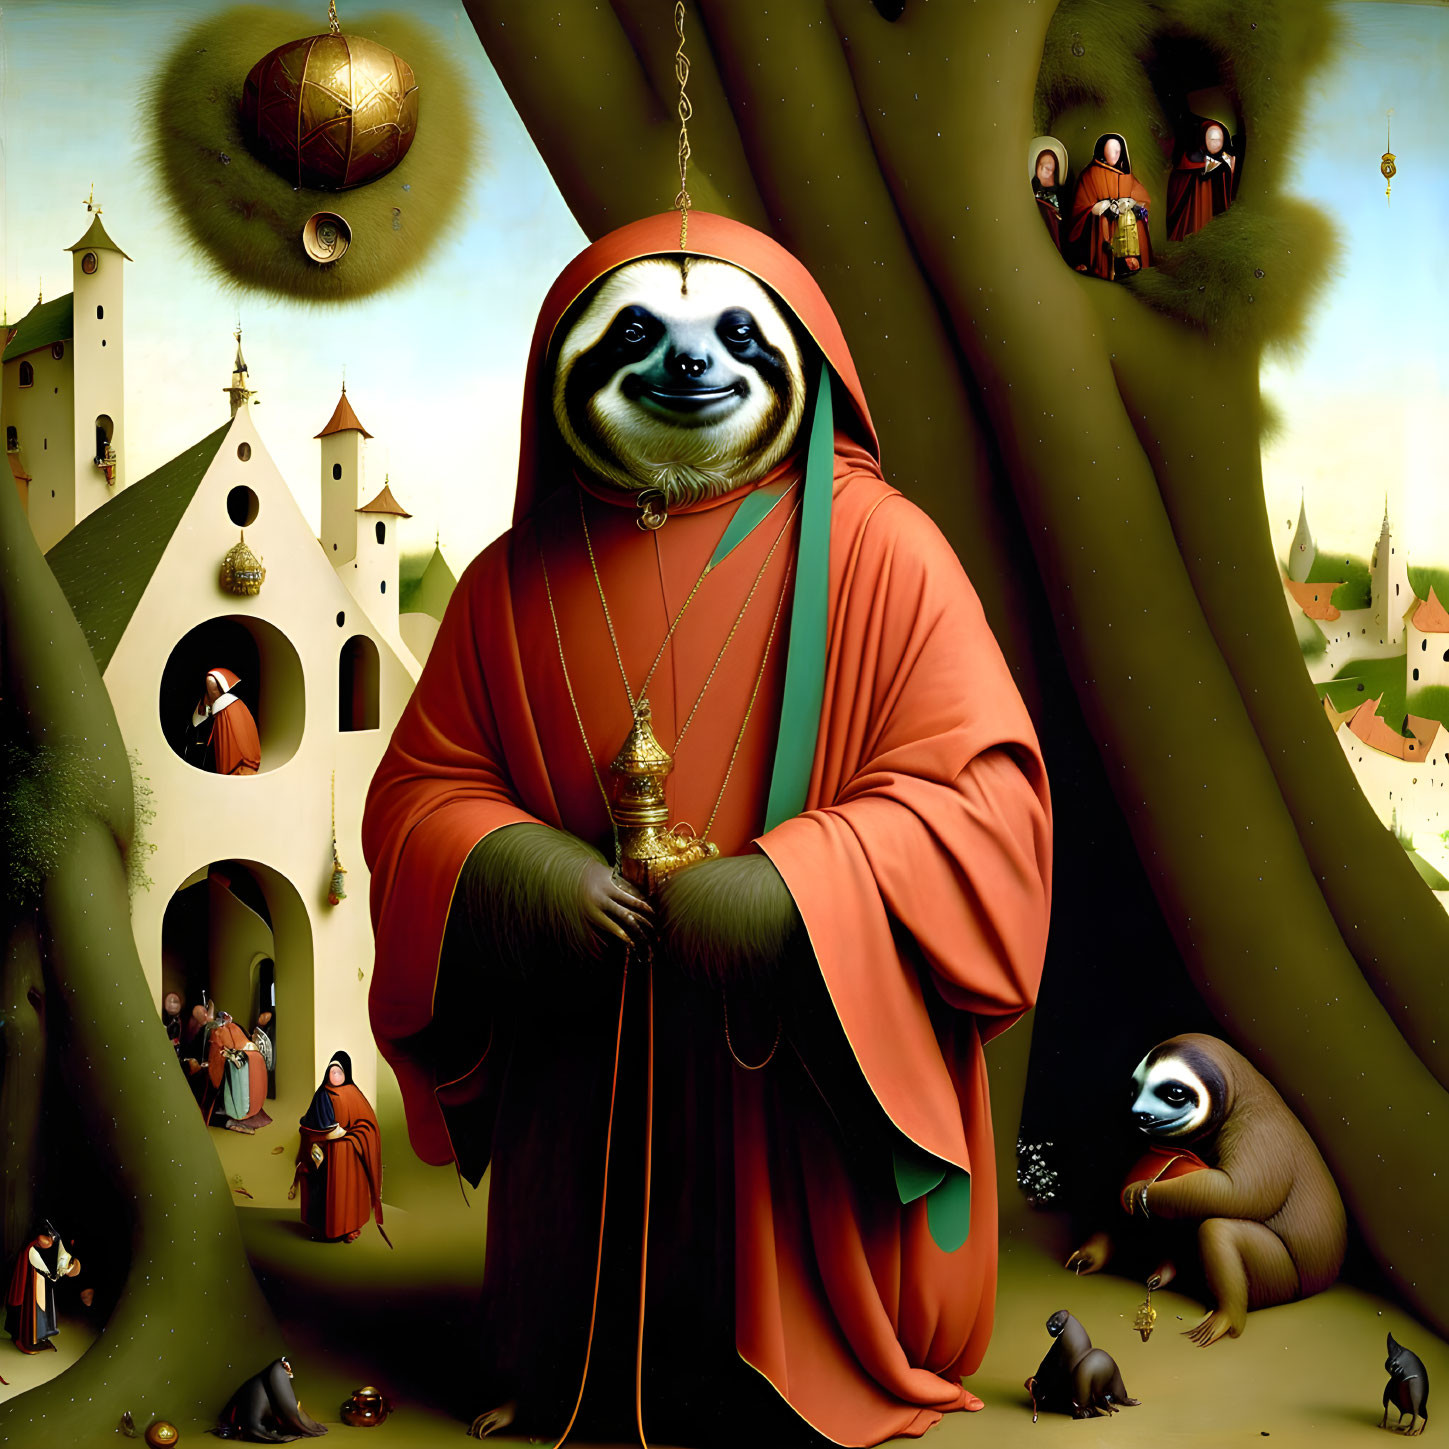 Surrealist painting of giant sloth in monk robes with censer in fantastical landscape